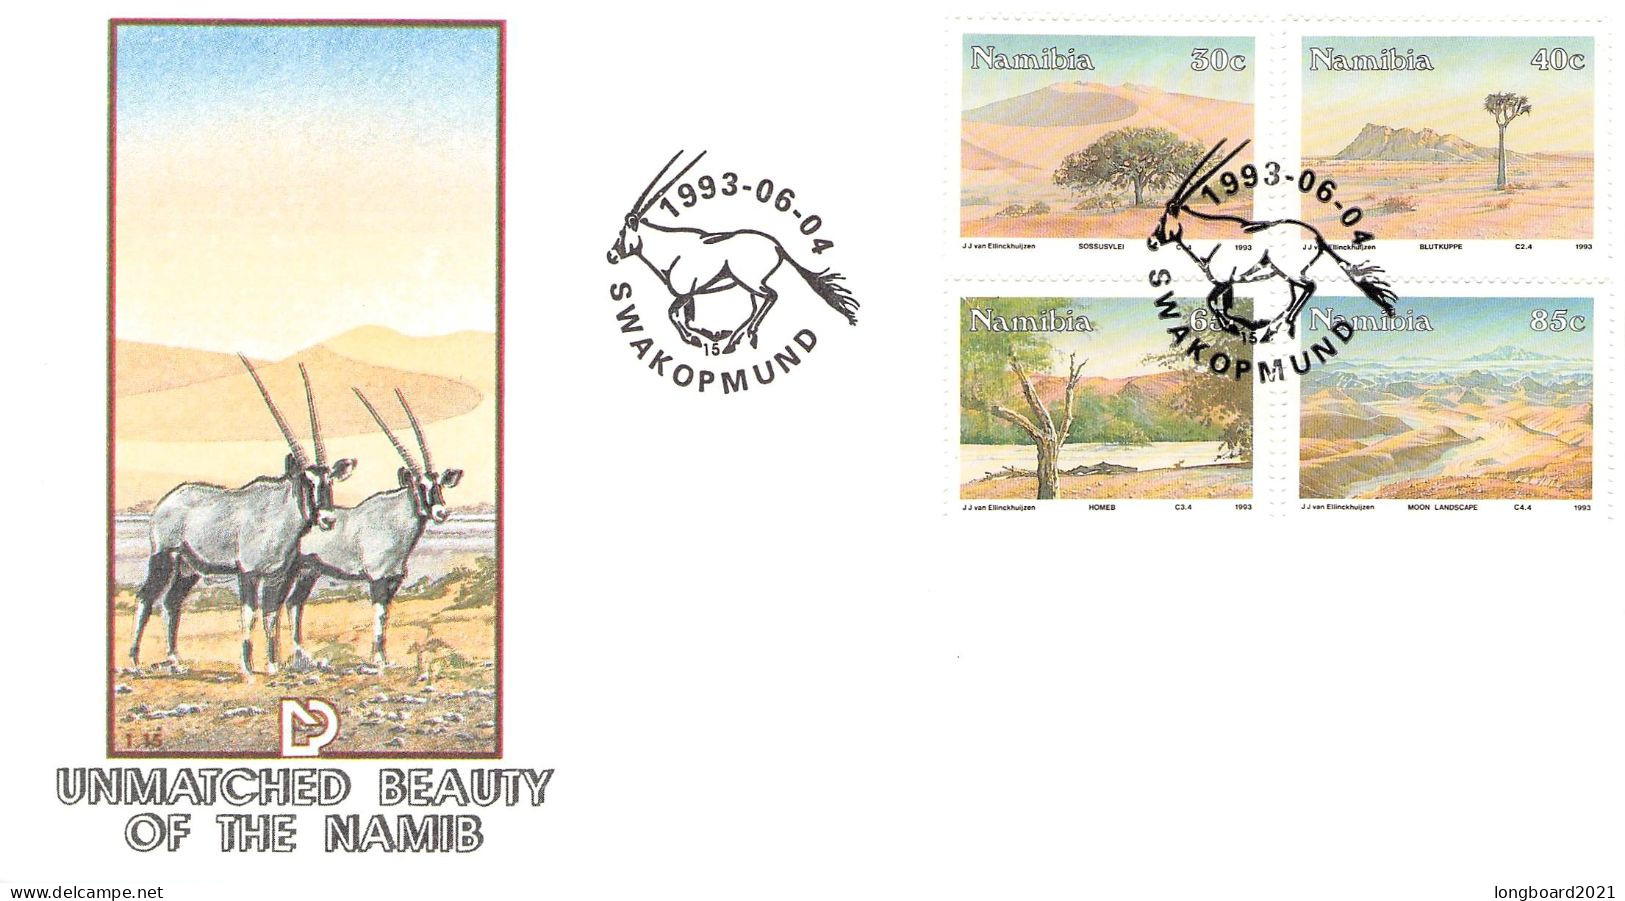 NAMIBIA - FDC 1993 UNMATCHED BEAUTY OF THE NAMIB / 4304 - Namibie (1990- ...)